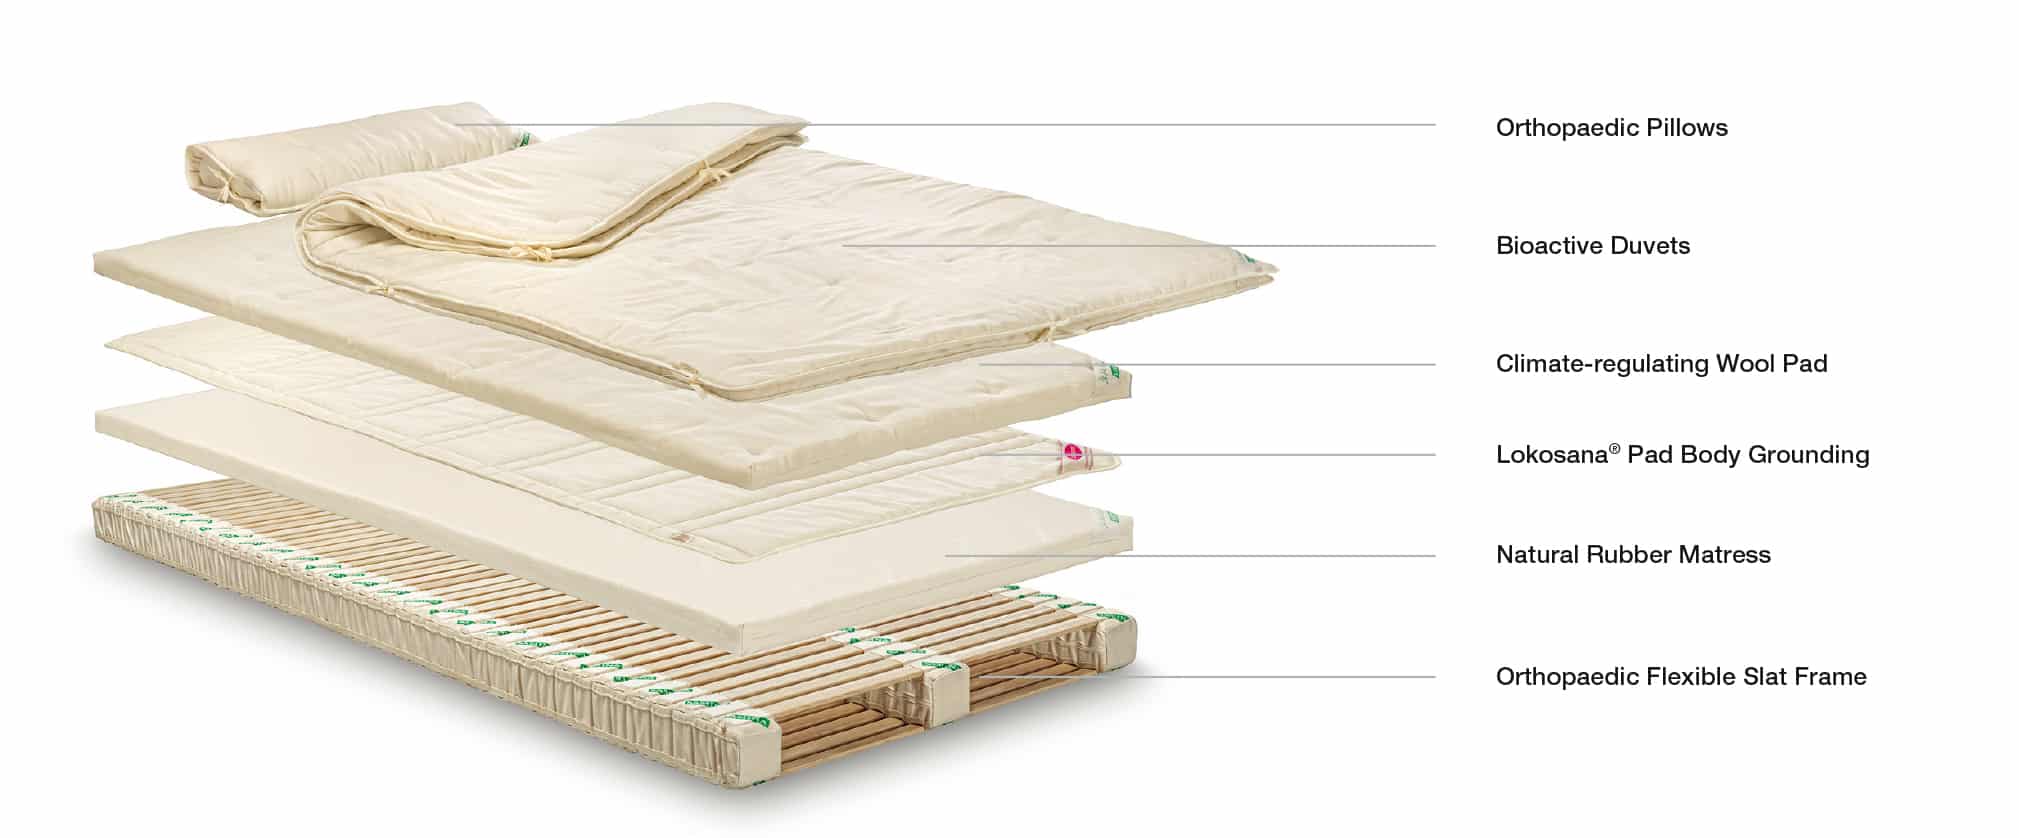 SAMINA healthy Sleep System with labeled layers